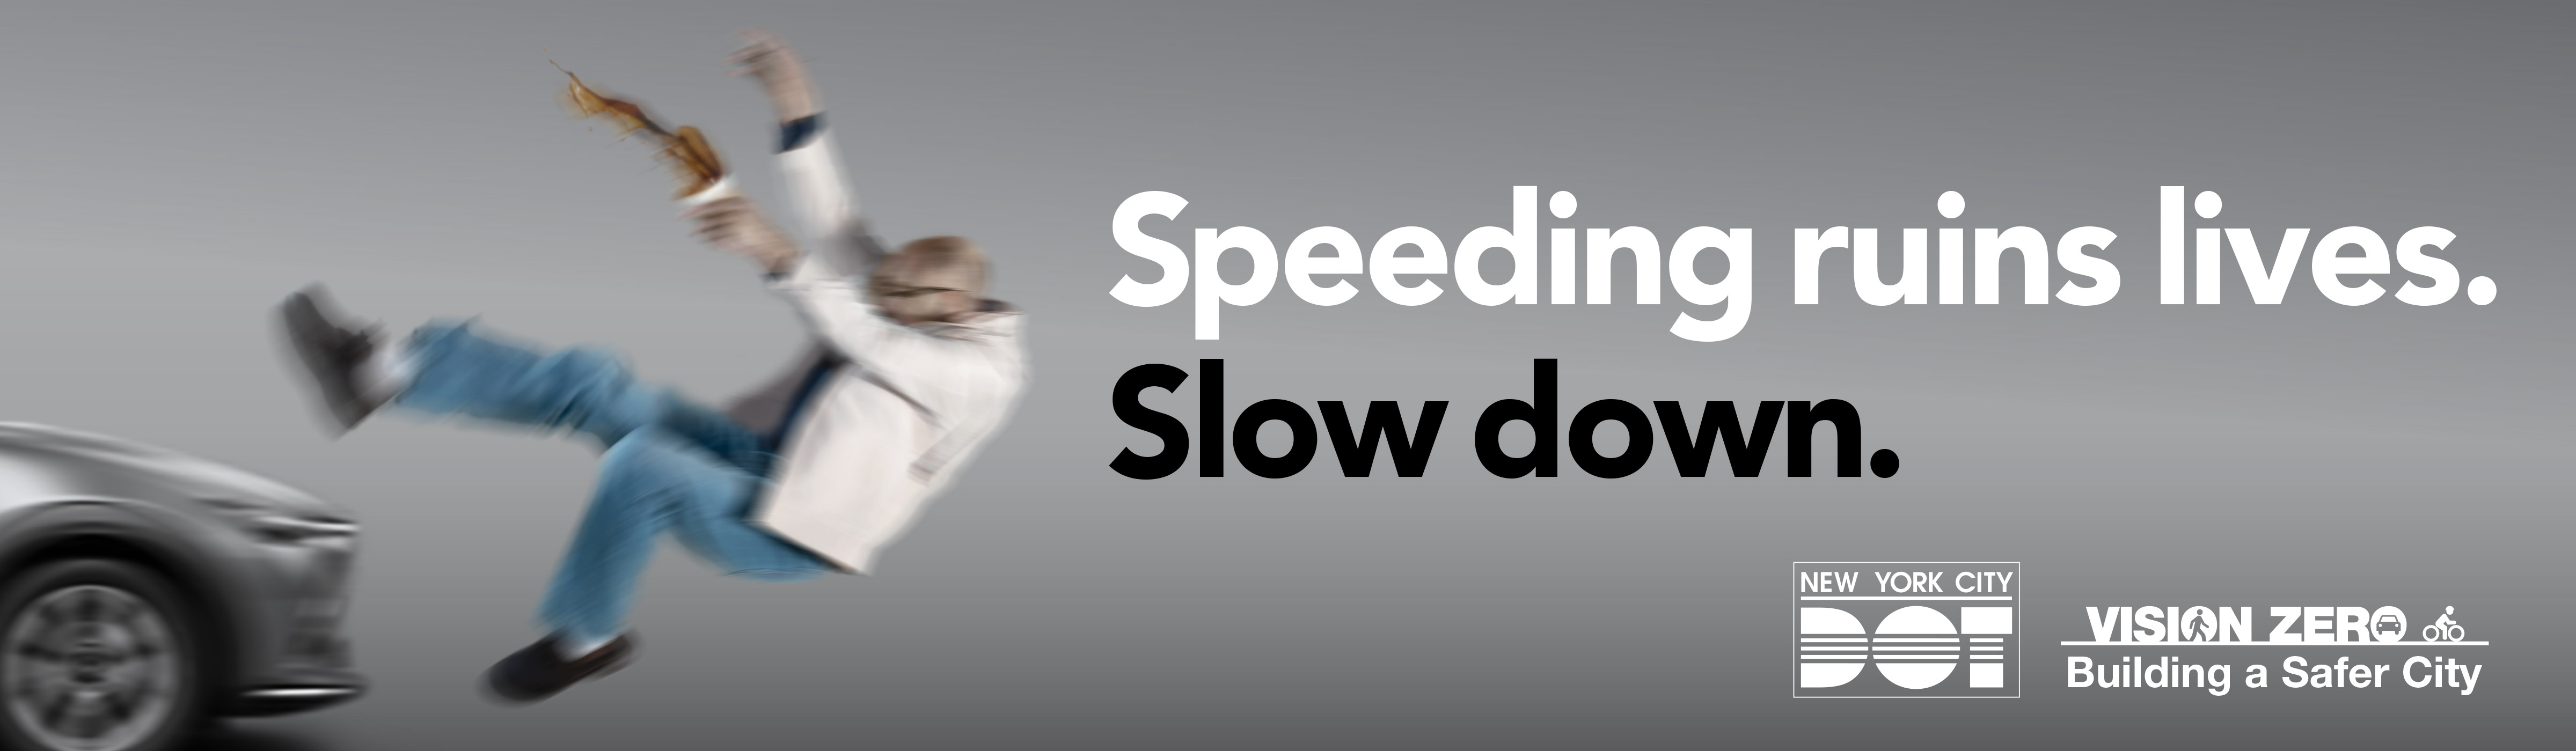 Vision Zero campaign ad shows a blurred image of a person flying in the air after being hit by a car. Overlay text reads “Speeding ruins lives. Slow down.” The N Y C D O T and Vision Zero logos are placed on the bottom right hand corner.